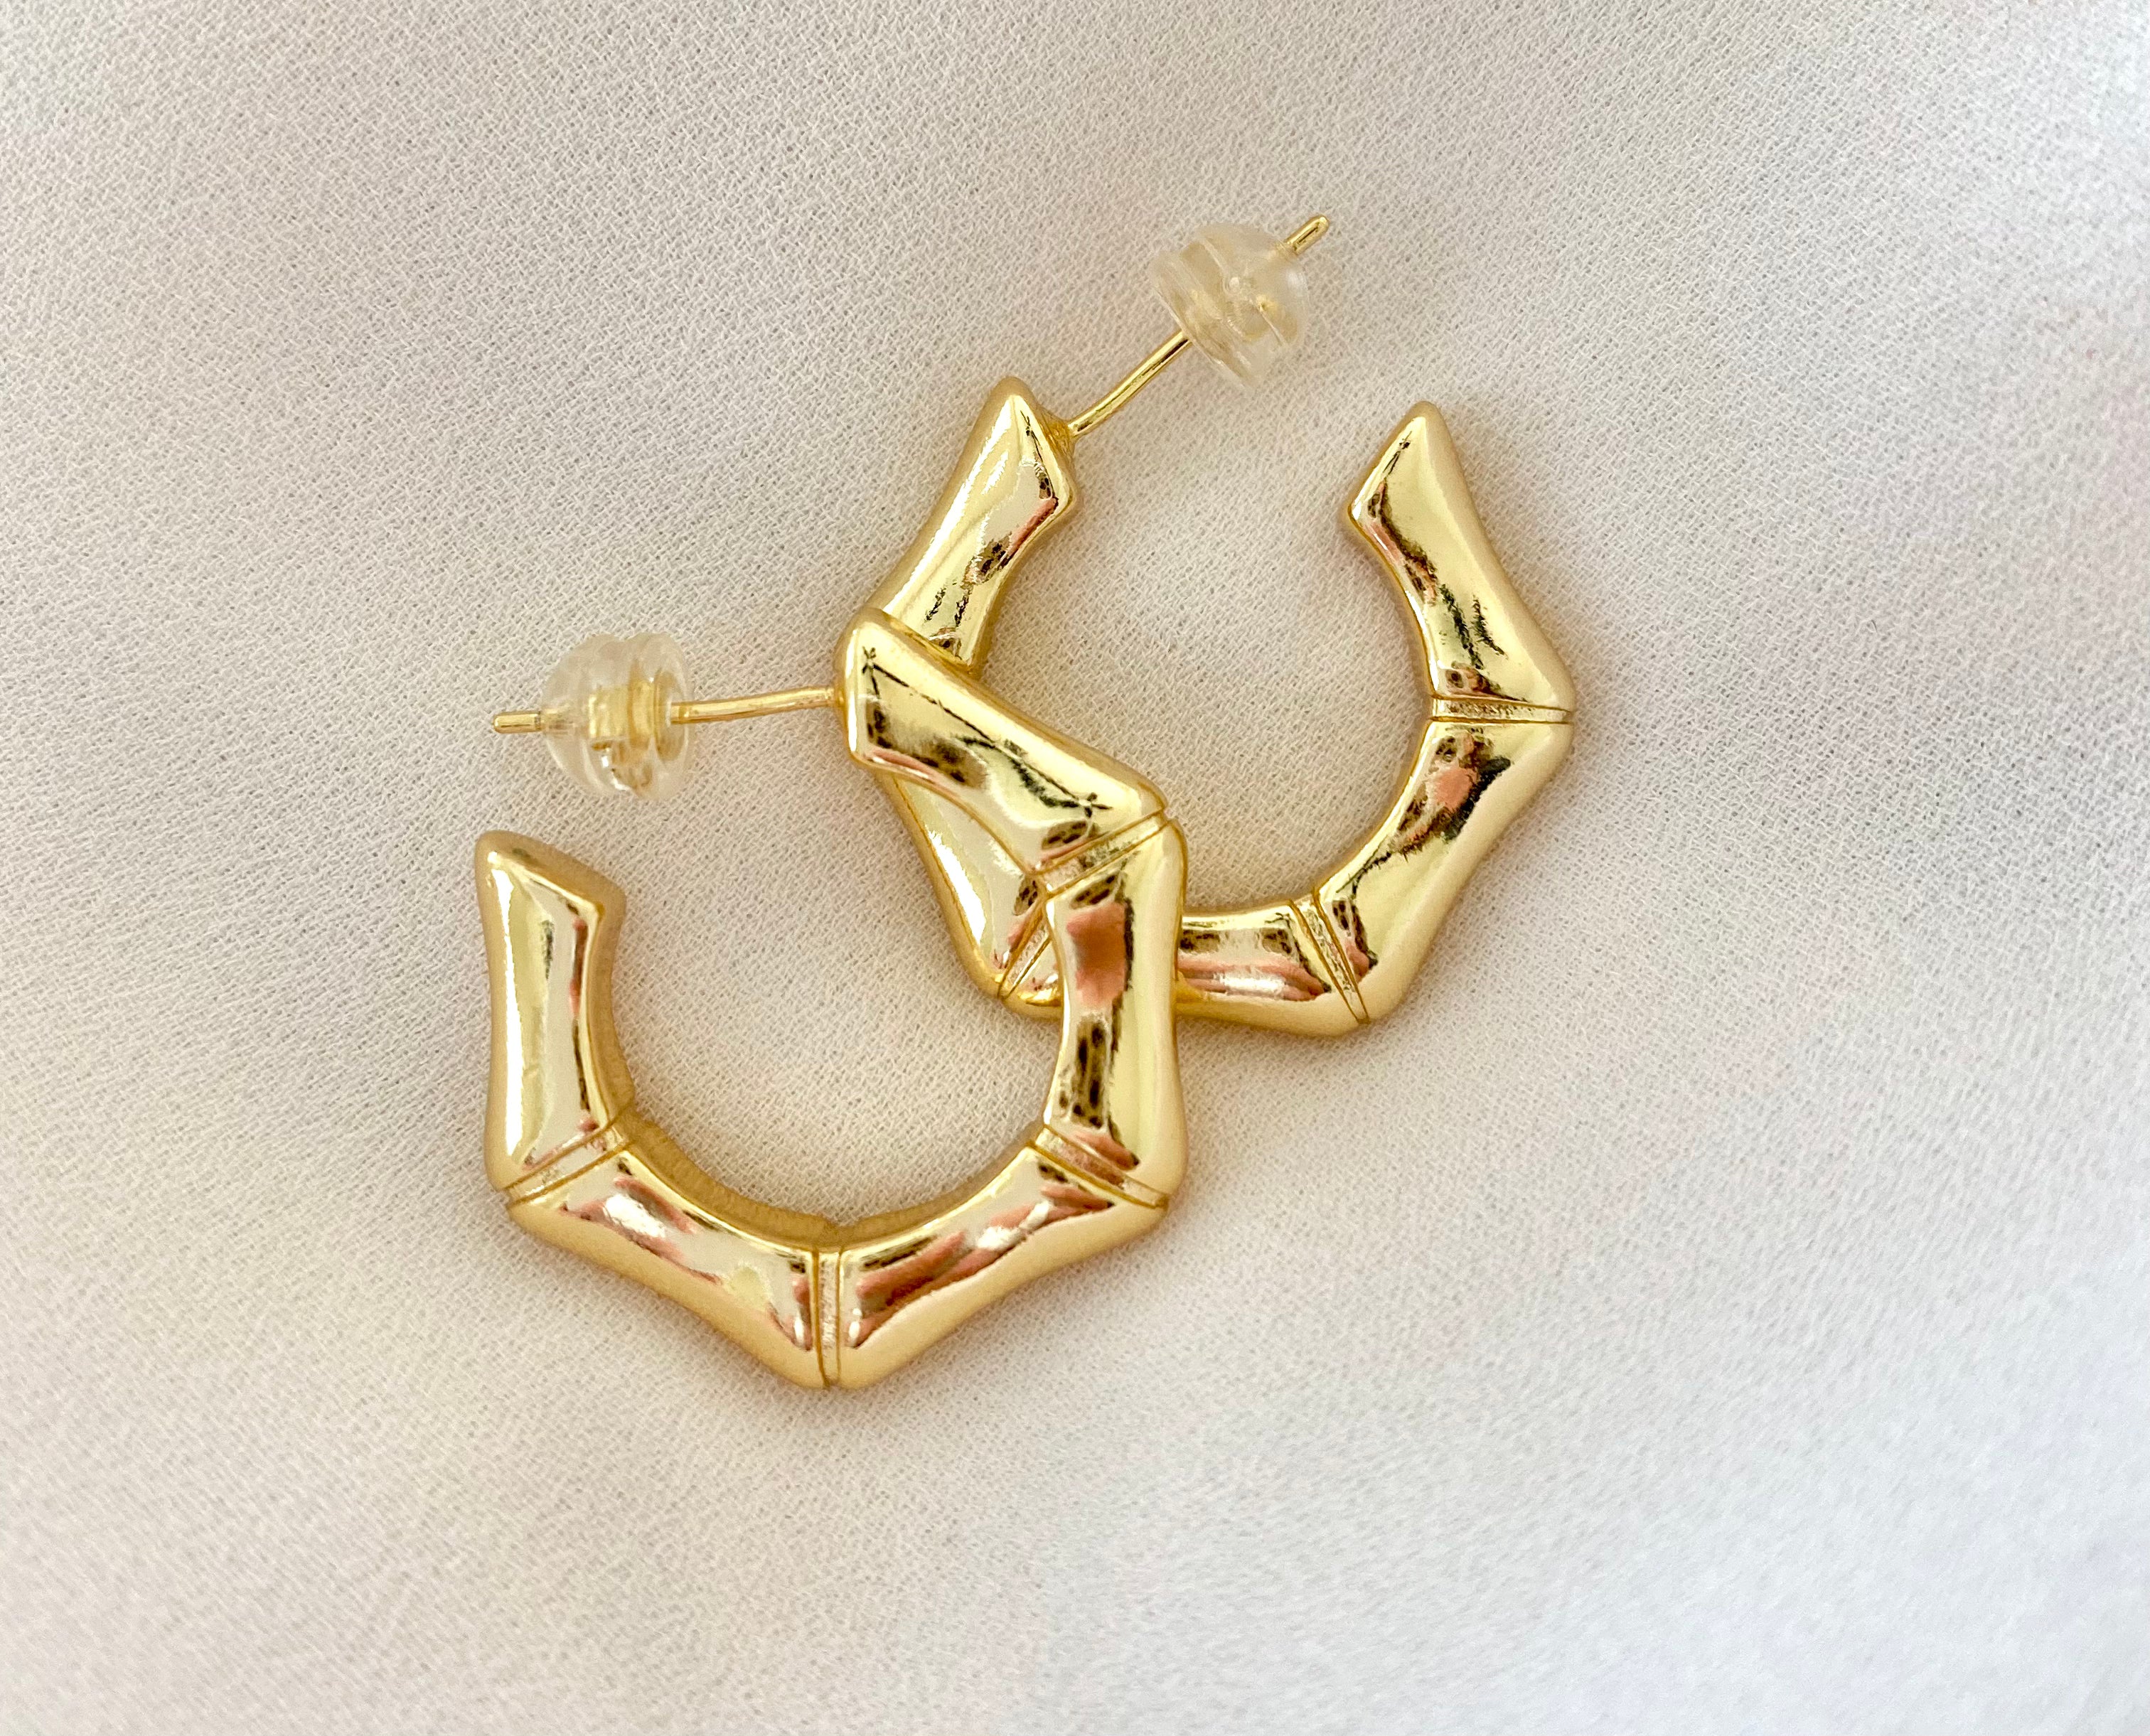 Gold Filled Chunky Bamboo Style Hoop Earrings